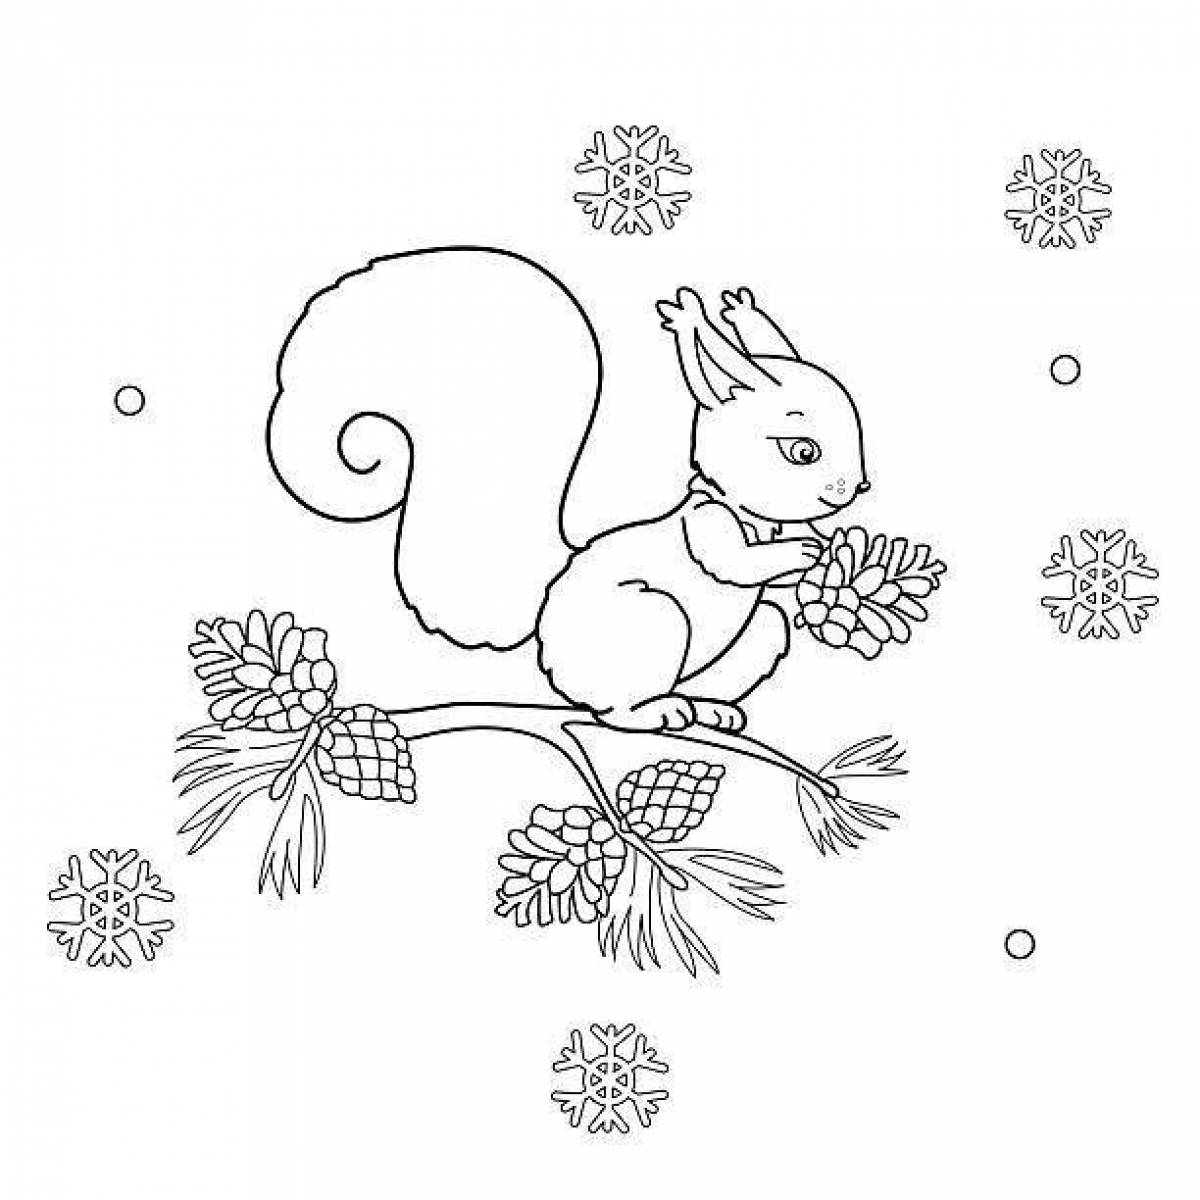 Playful coloring animals in the winter forest